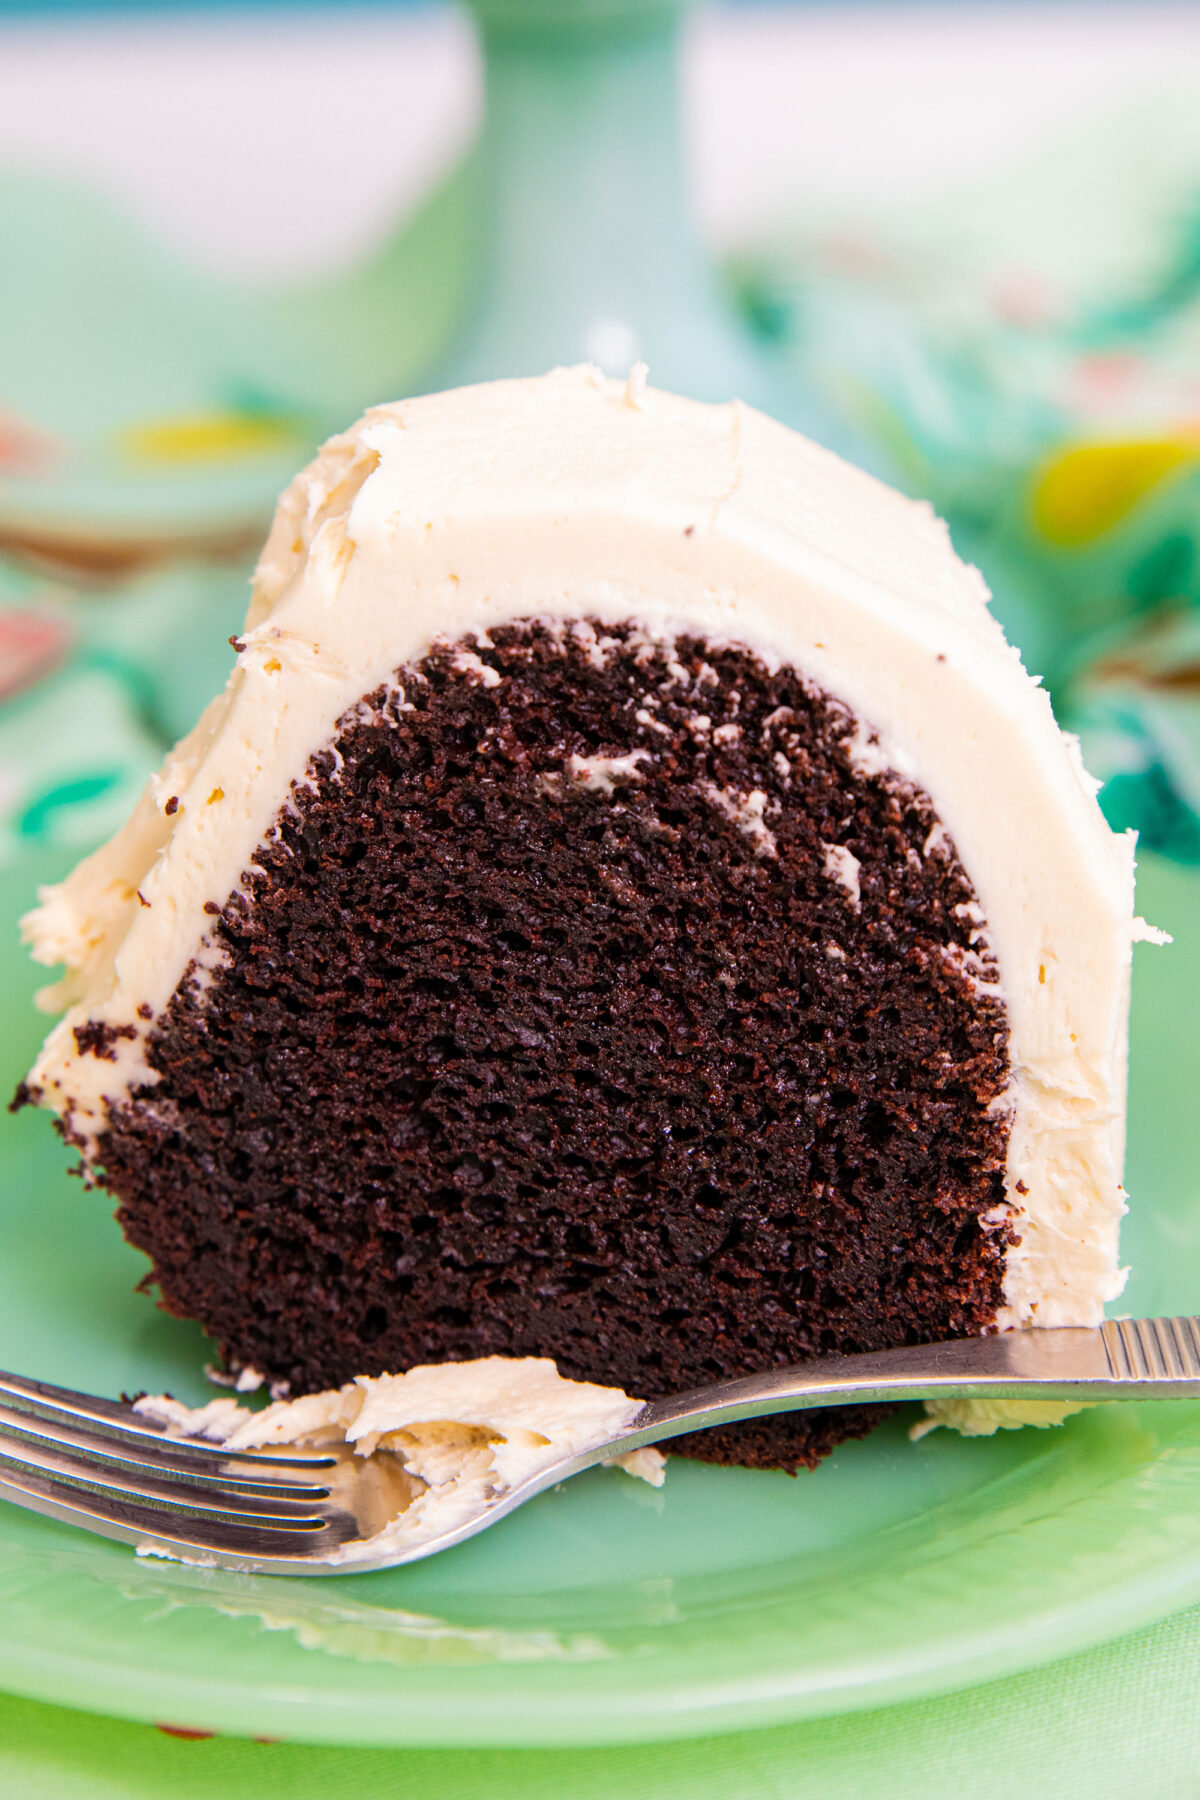  A slice of Guinness® chocolate cake covered in Irish Cream buttercream frosting